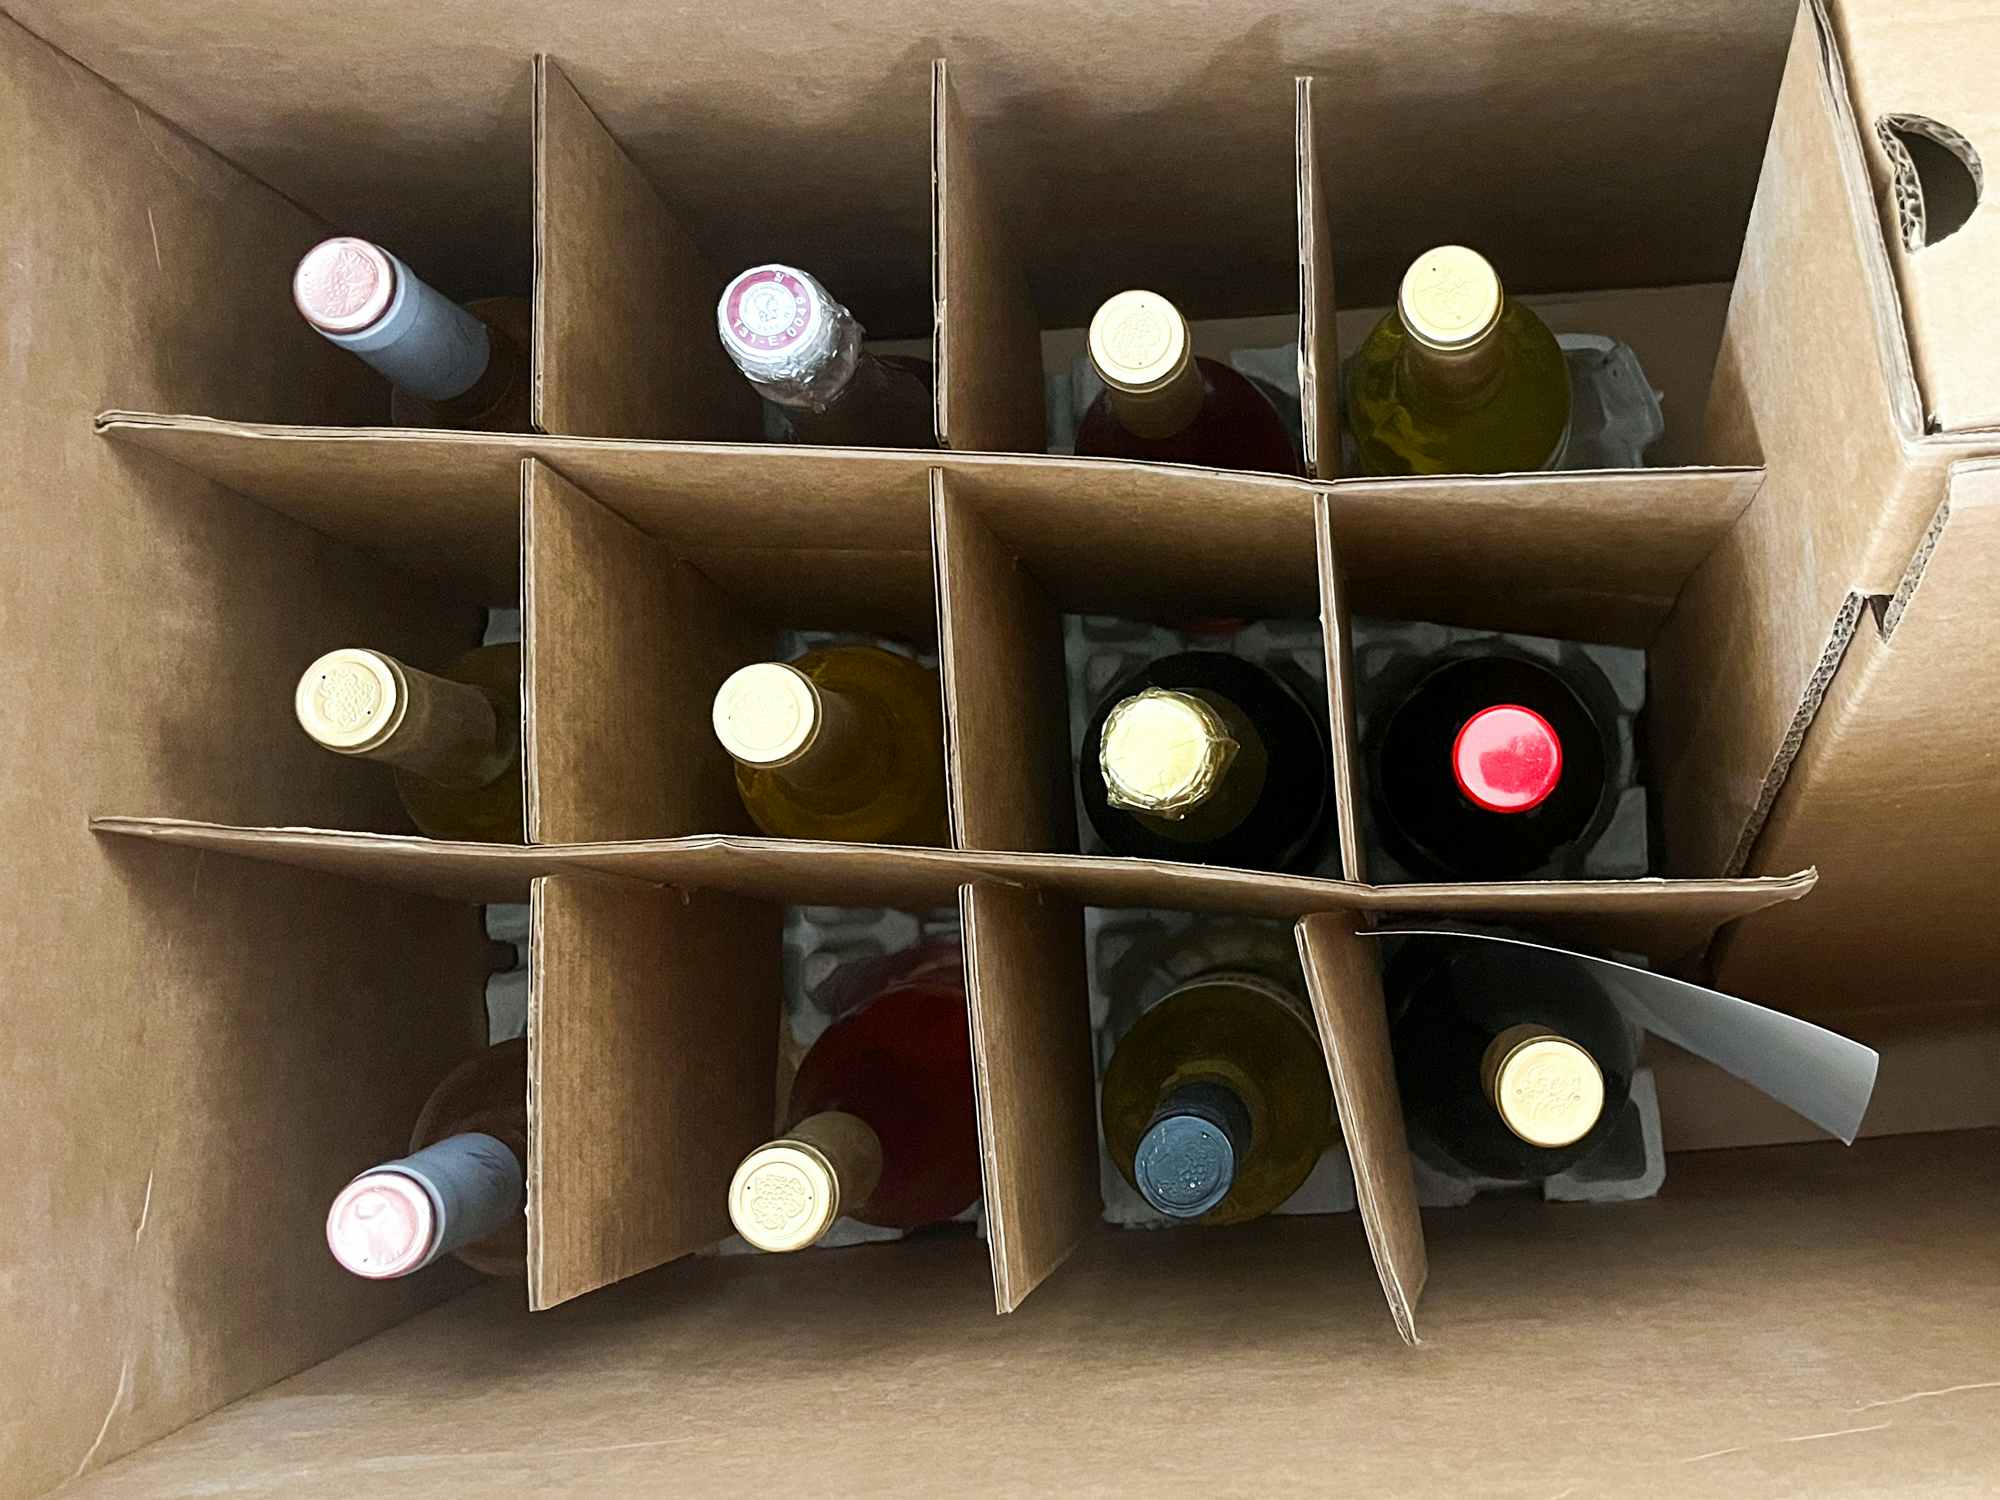 12 bottles of wine packed into a box